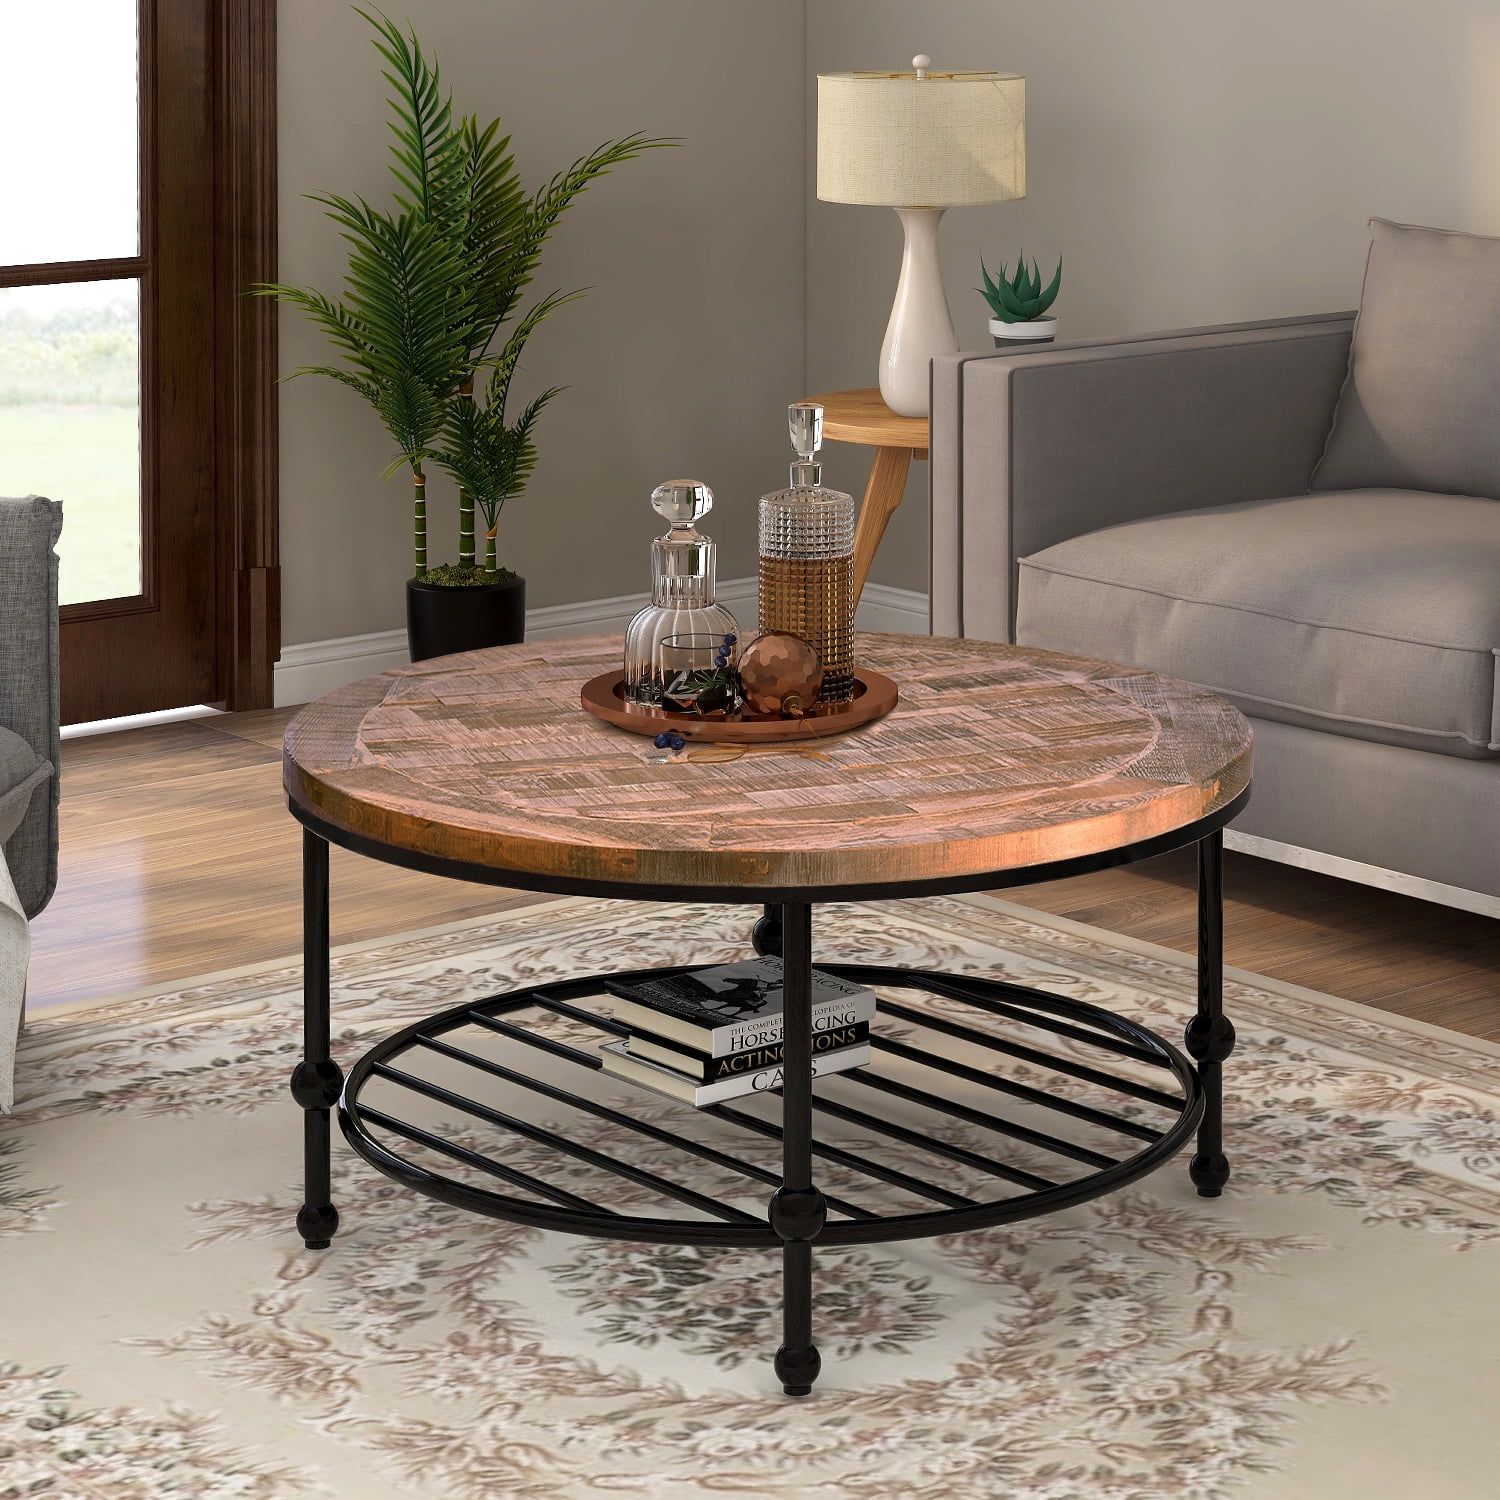 Rustic Natural Round Coffee Table With Storage Shelf For Living Room In Coffee Tables With Open Storage Shelves (Gallery 9 of 20)